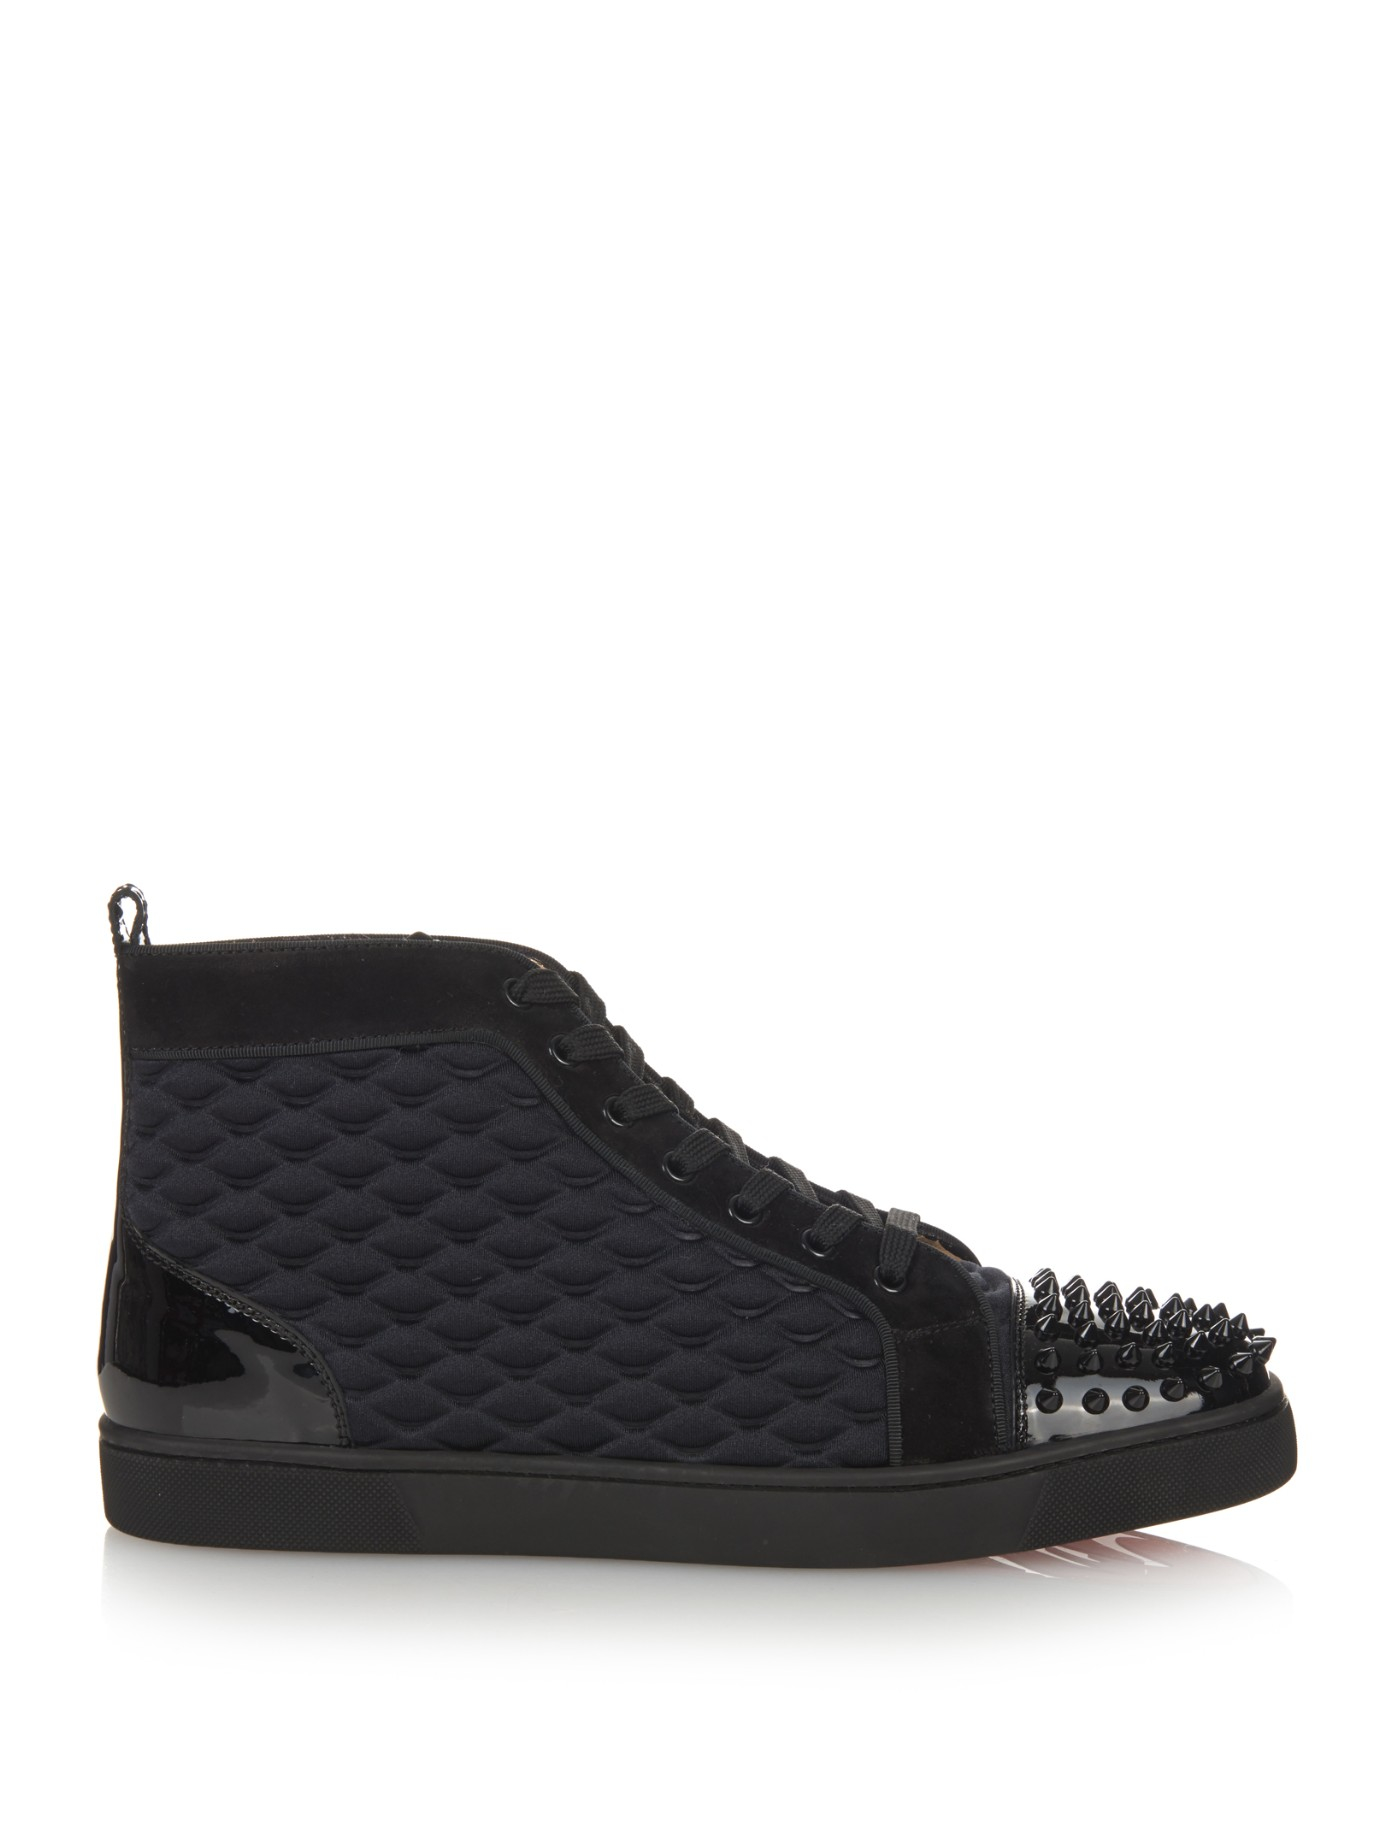 Christian louboutin Lou Spiked Leather High-Top Sneakers in Black ...  